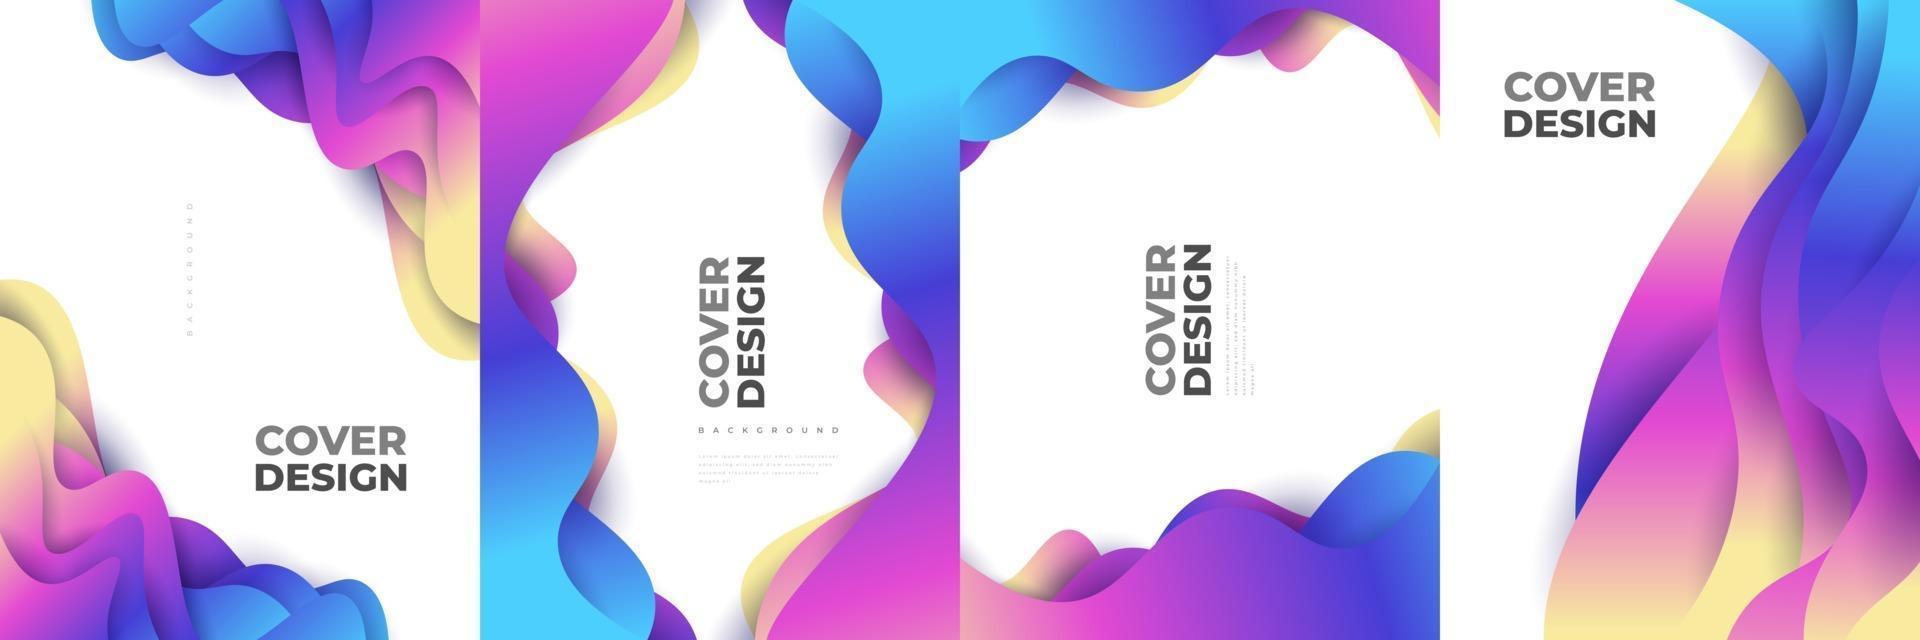 Modern Abstract Cover Design Template with Colorful Fluid Shapes vector